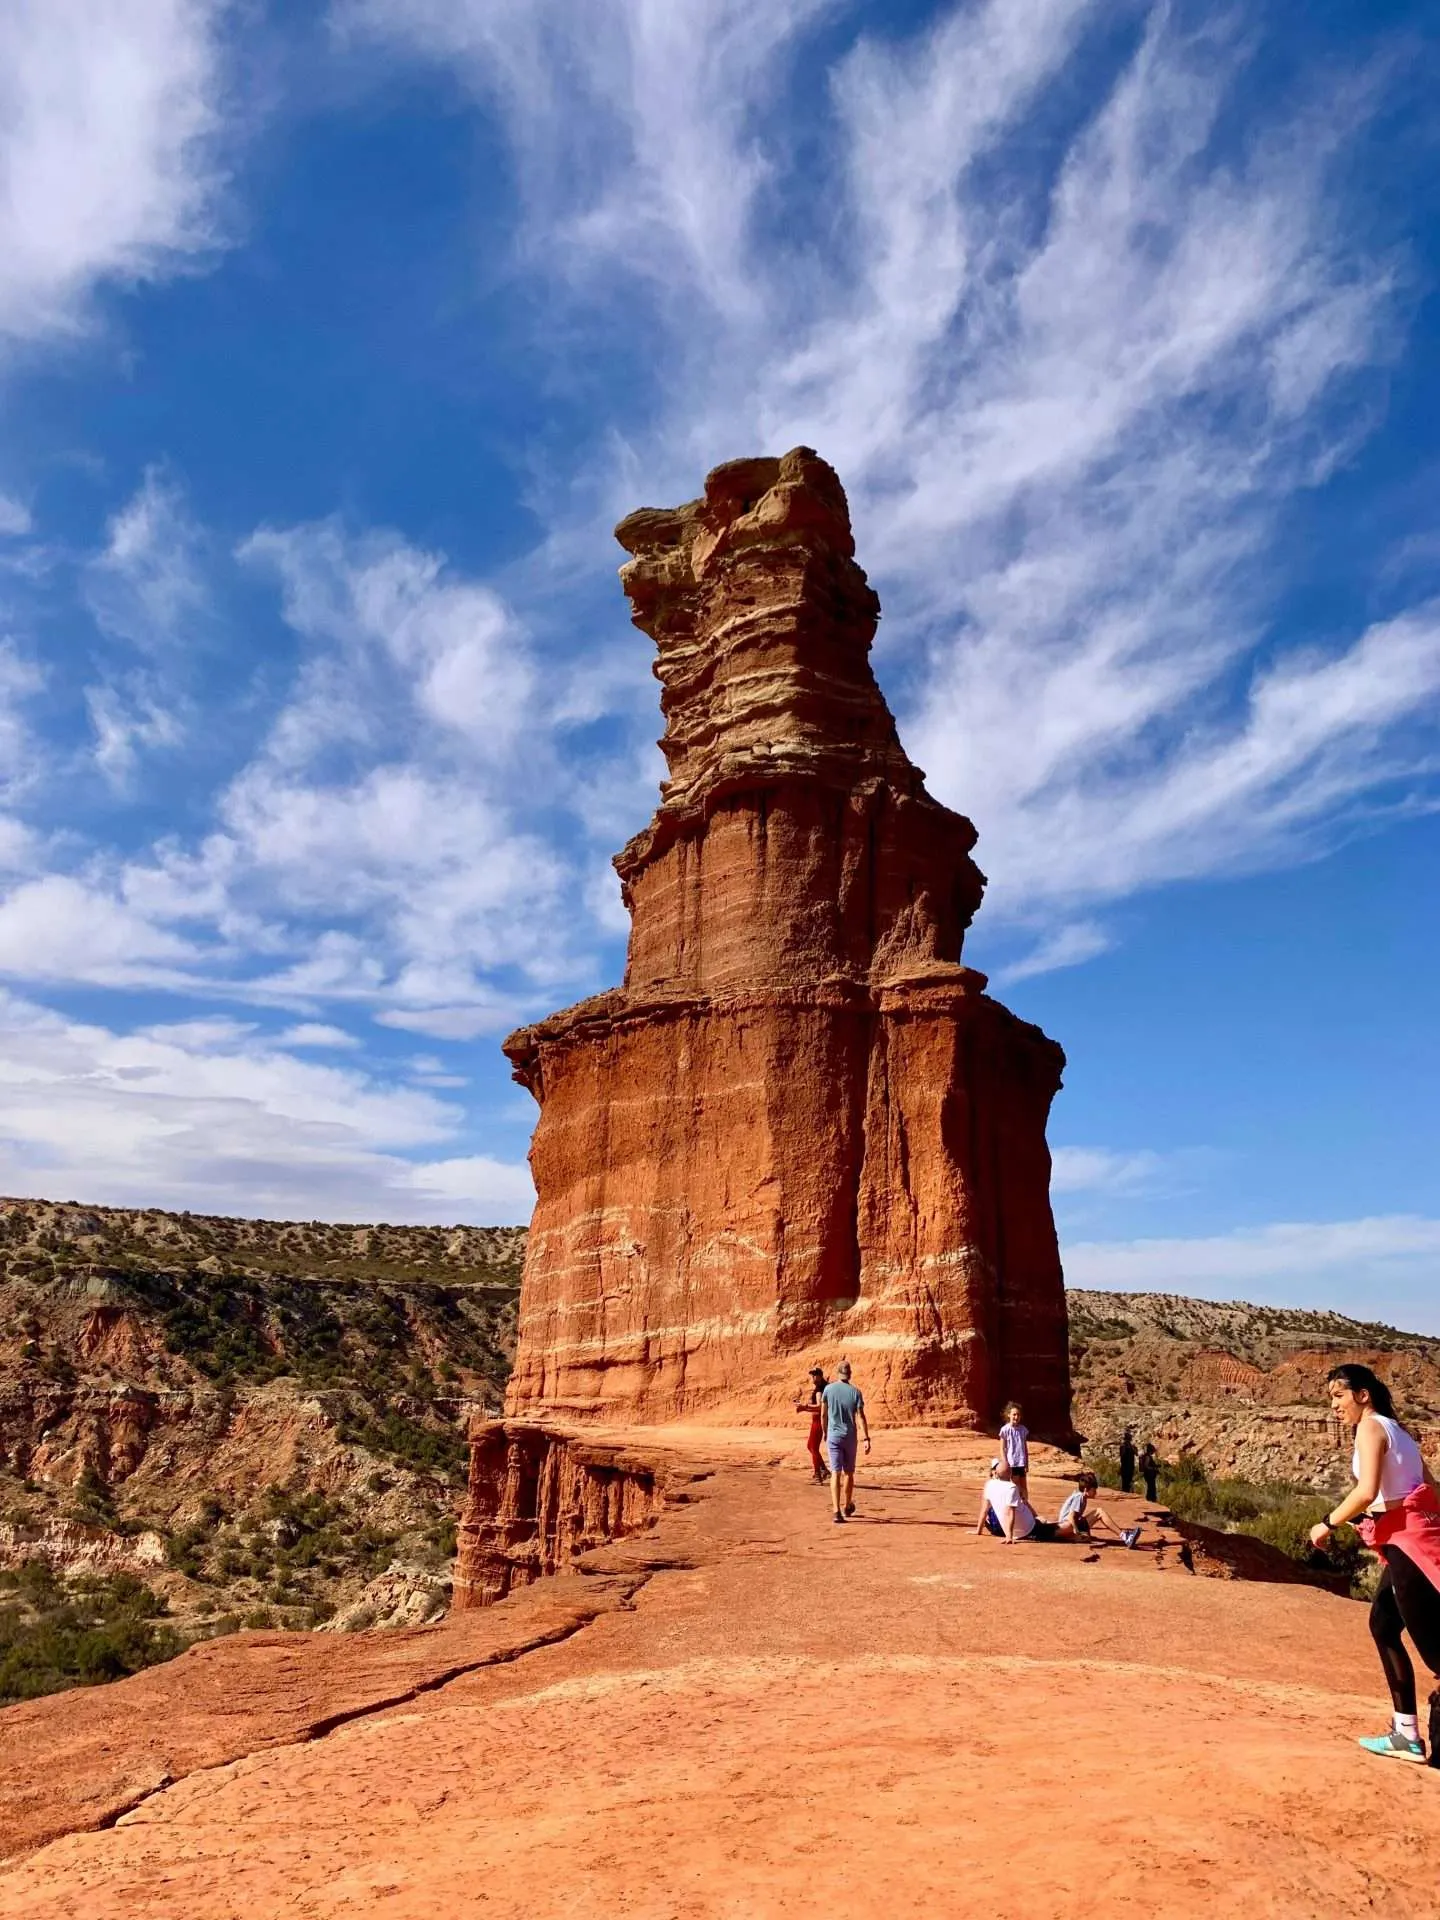 The Lighthouse Formation at Palo Duro Canyon State Park in Texas.